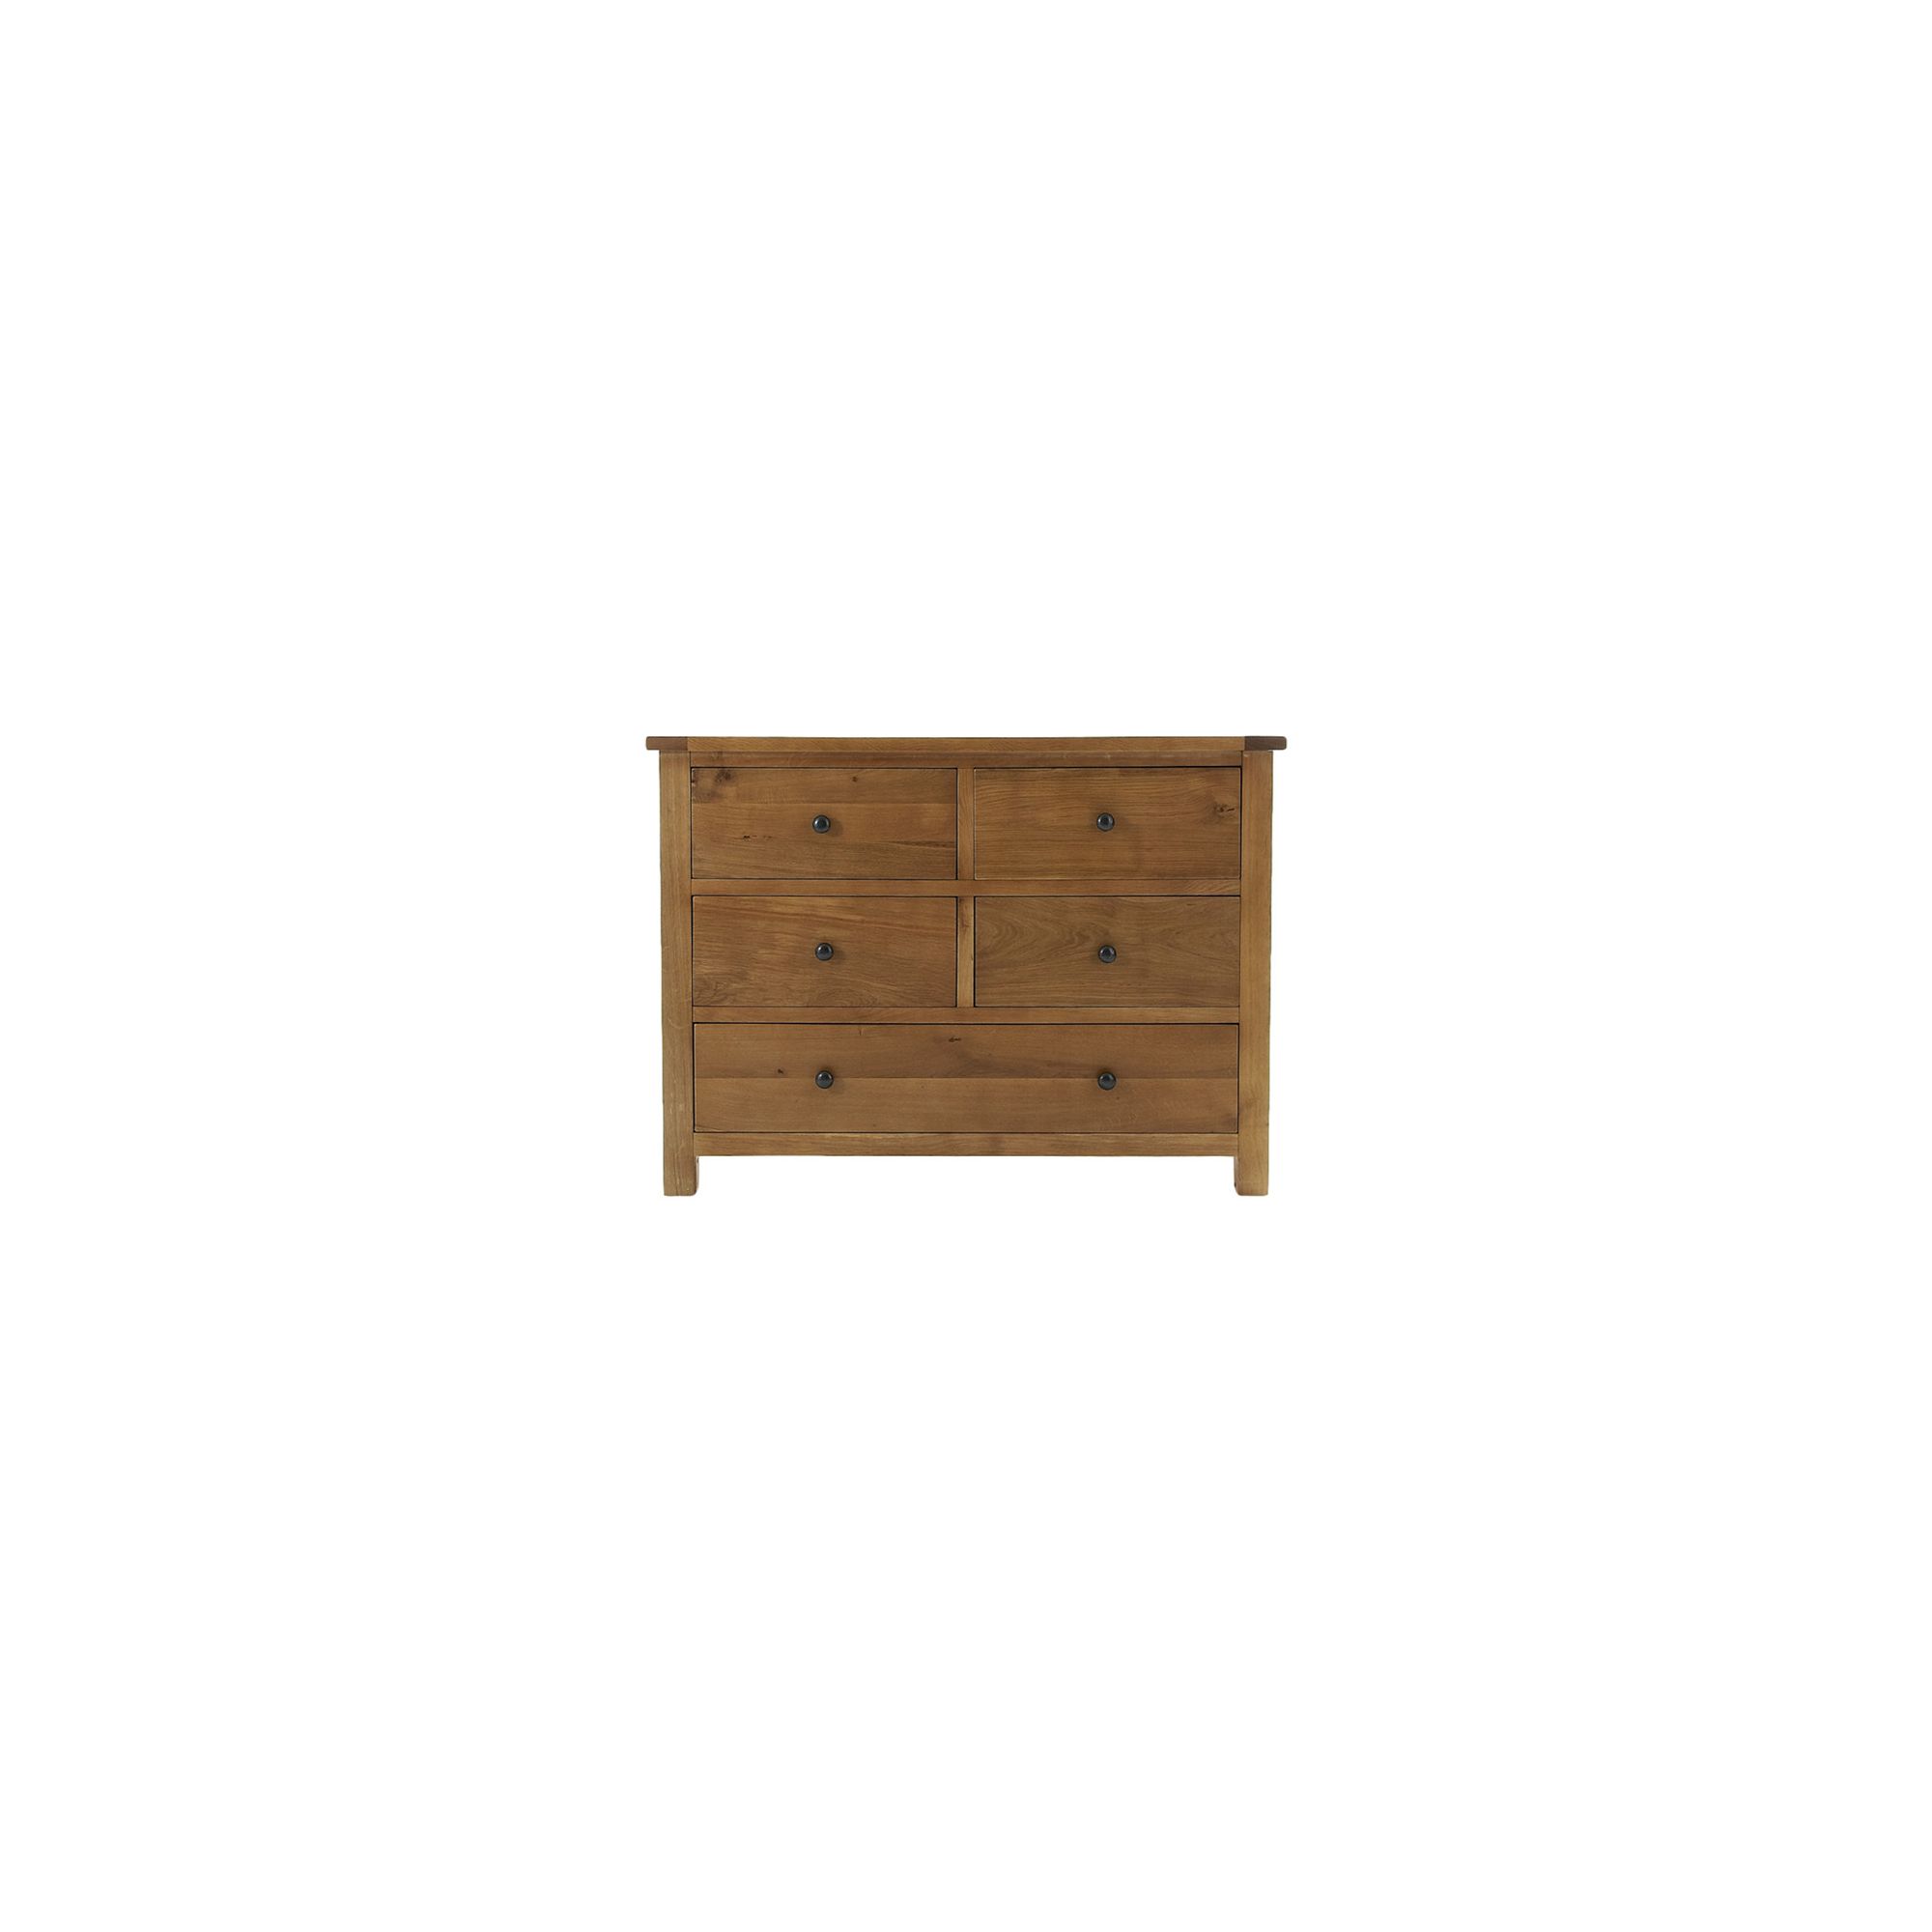 Thorndon Eden 4 Over 1 Drawer Chest in Warm Oak at Tescos Direct